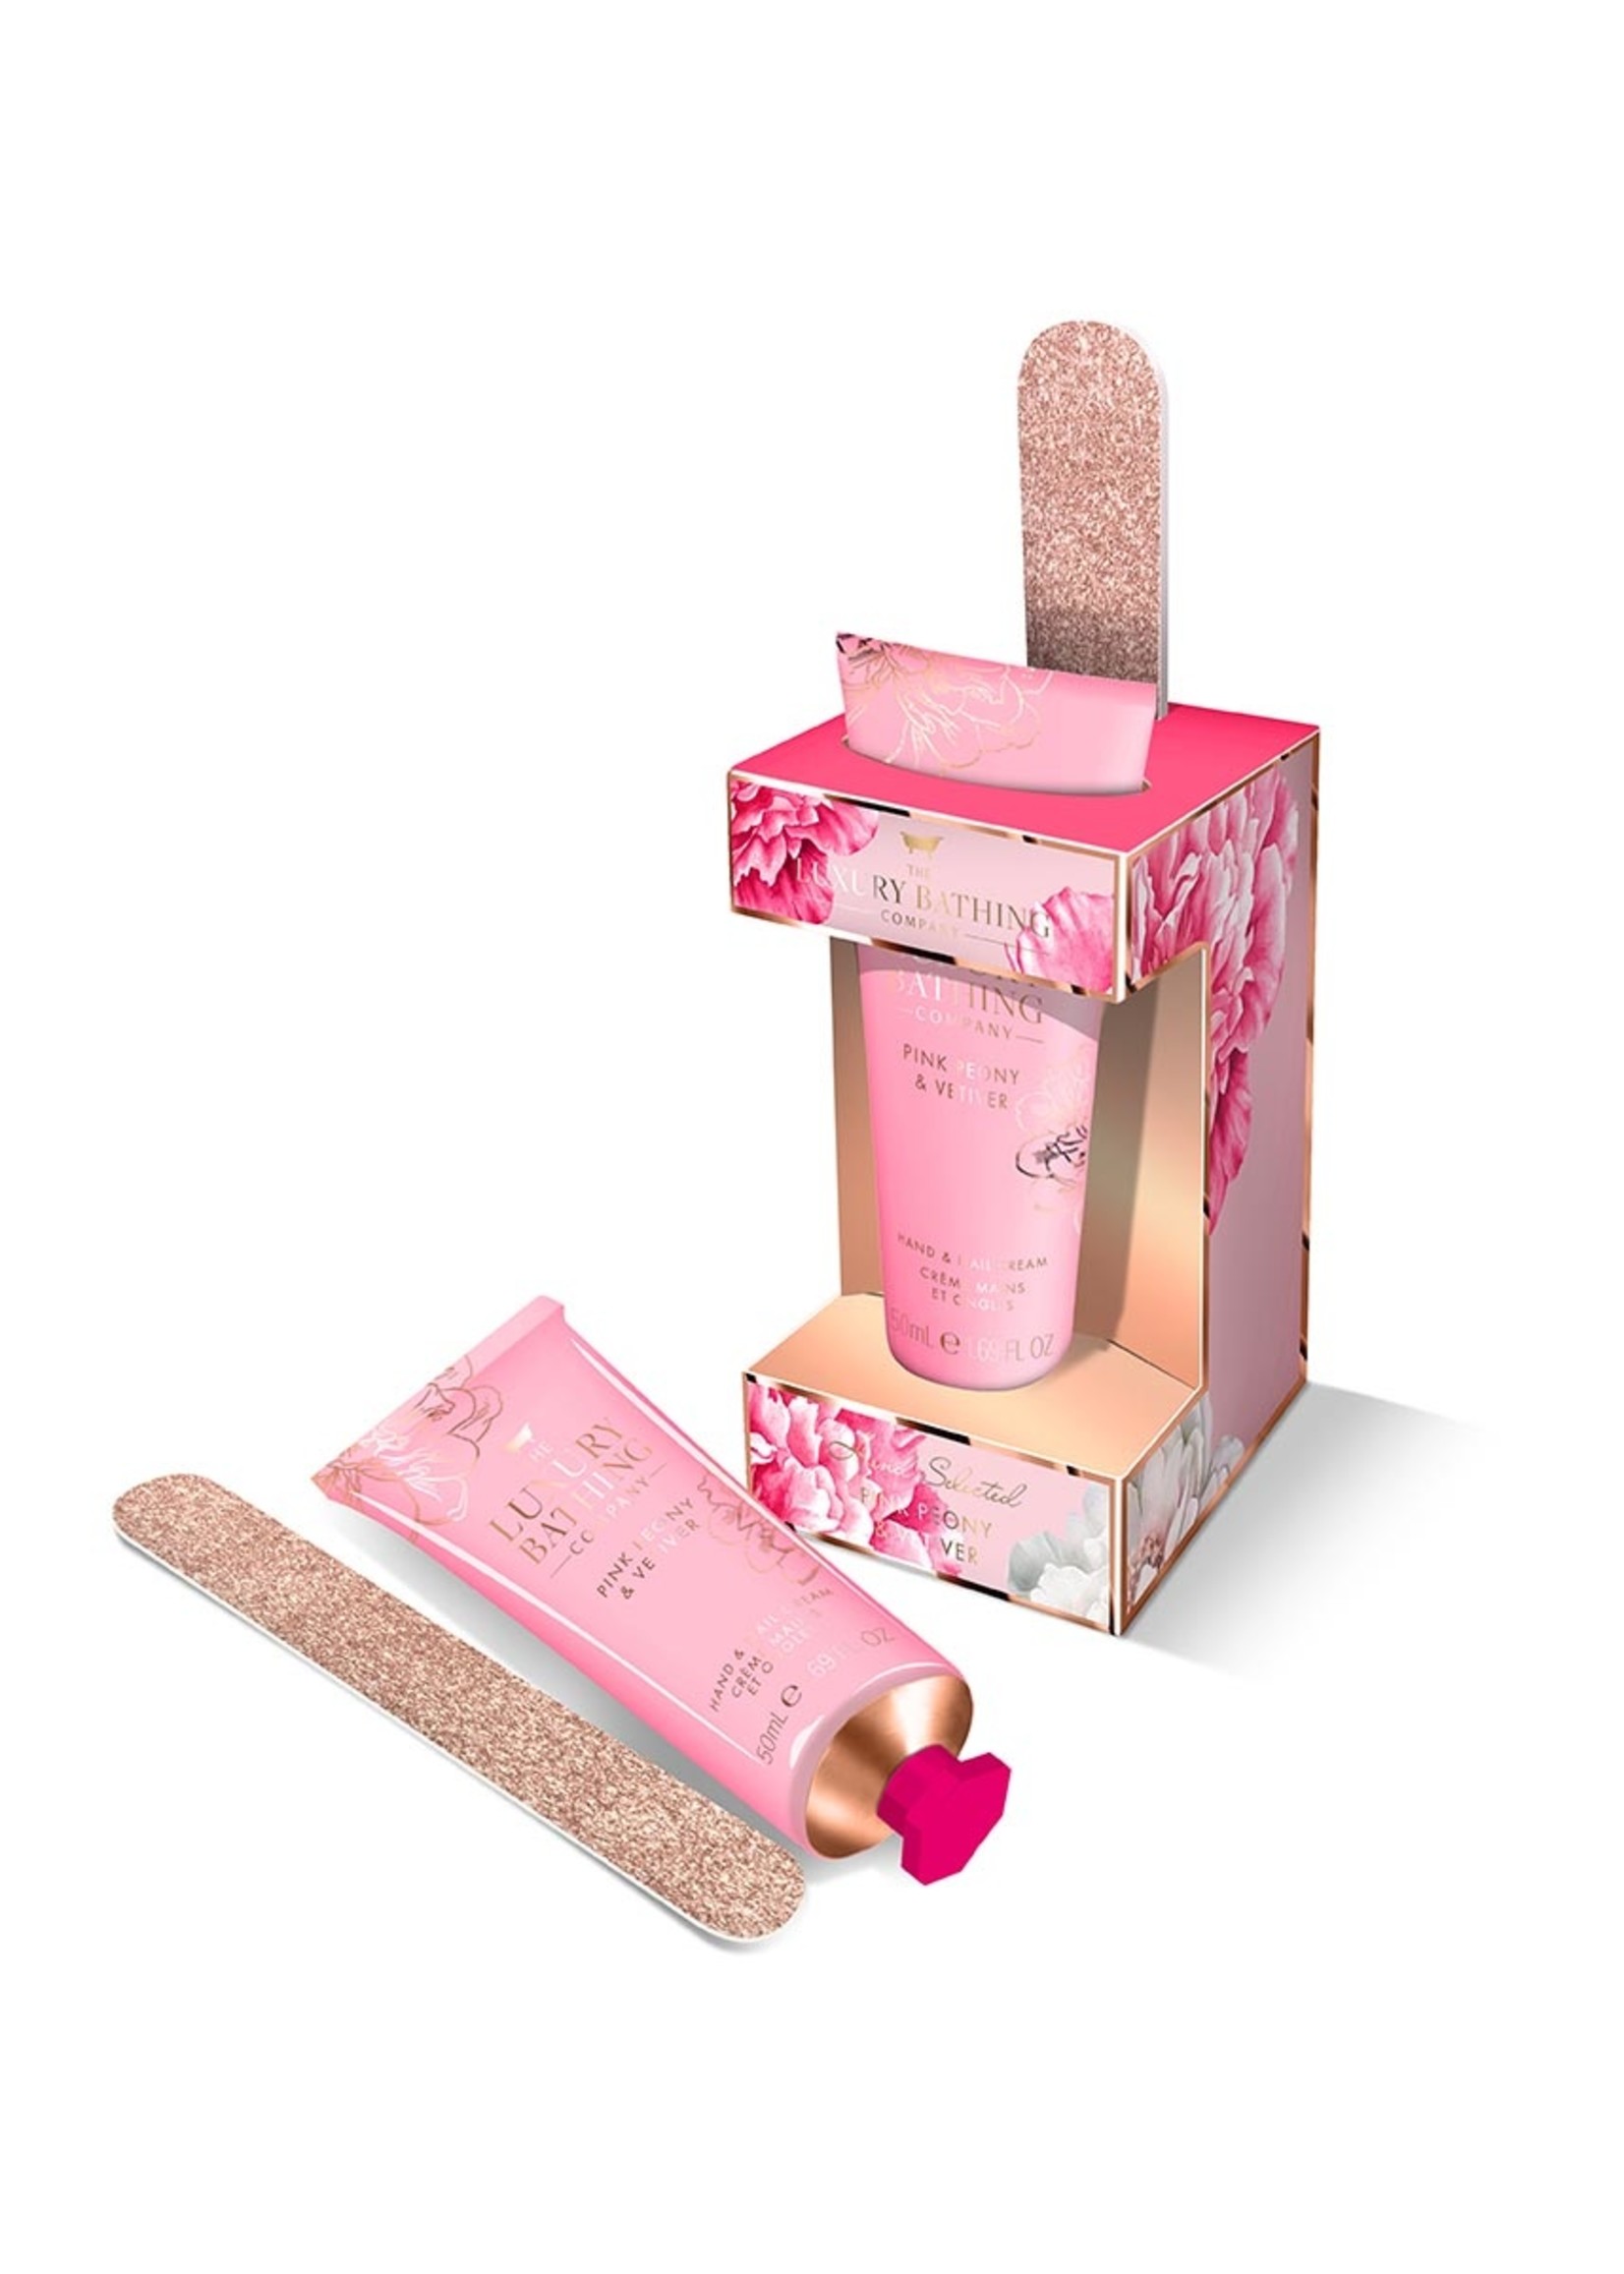 Grace Cole Hand & Body Set Warm Floral Finesse - Pink Peony & Vetiver - The Luxury Bathing Company